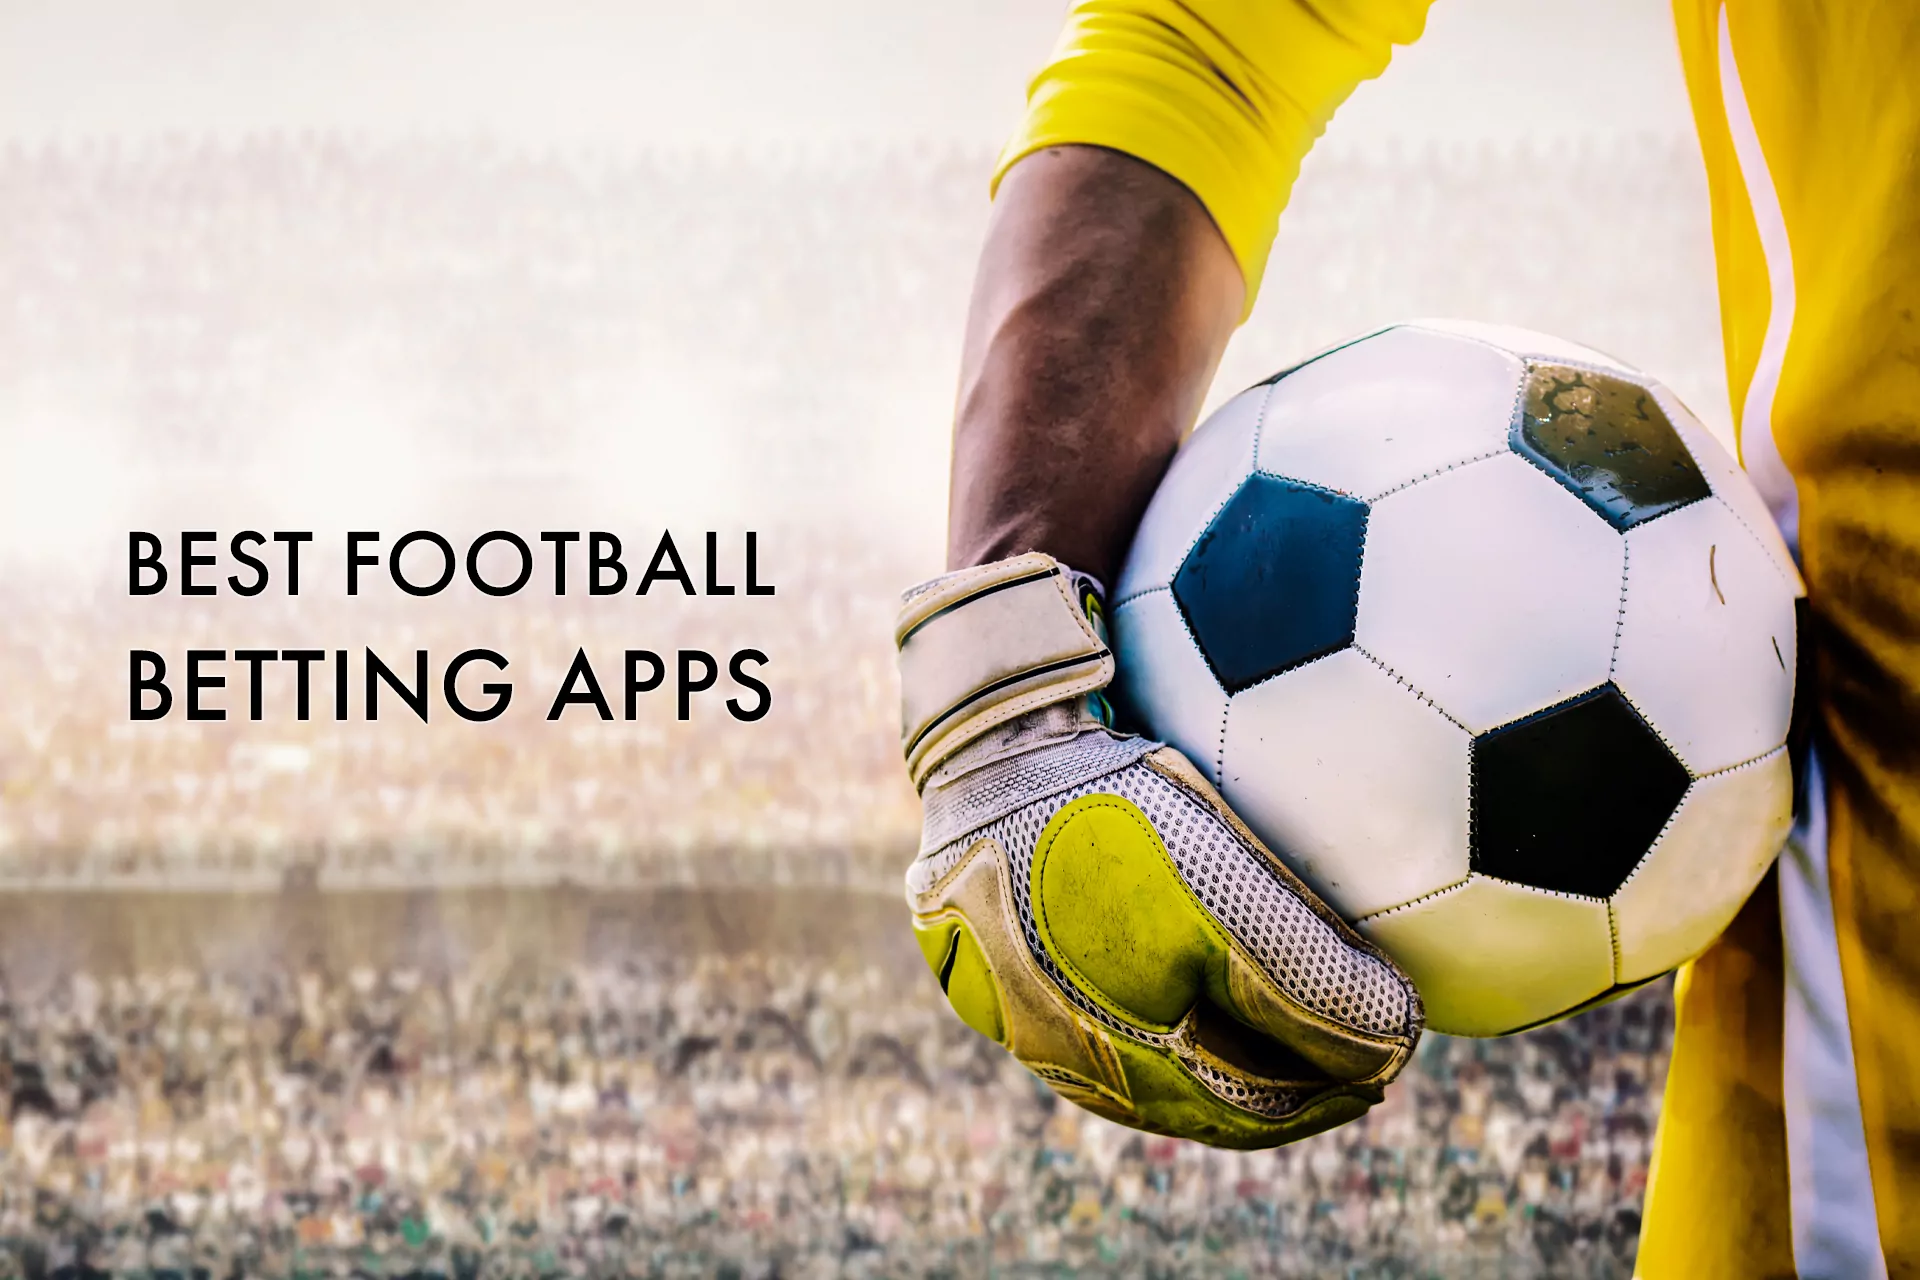 If you are a fan of betting on football events, you must try one of these apps.